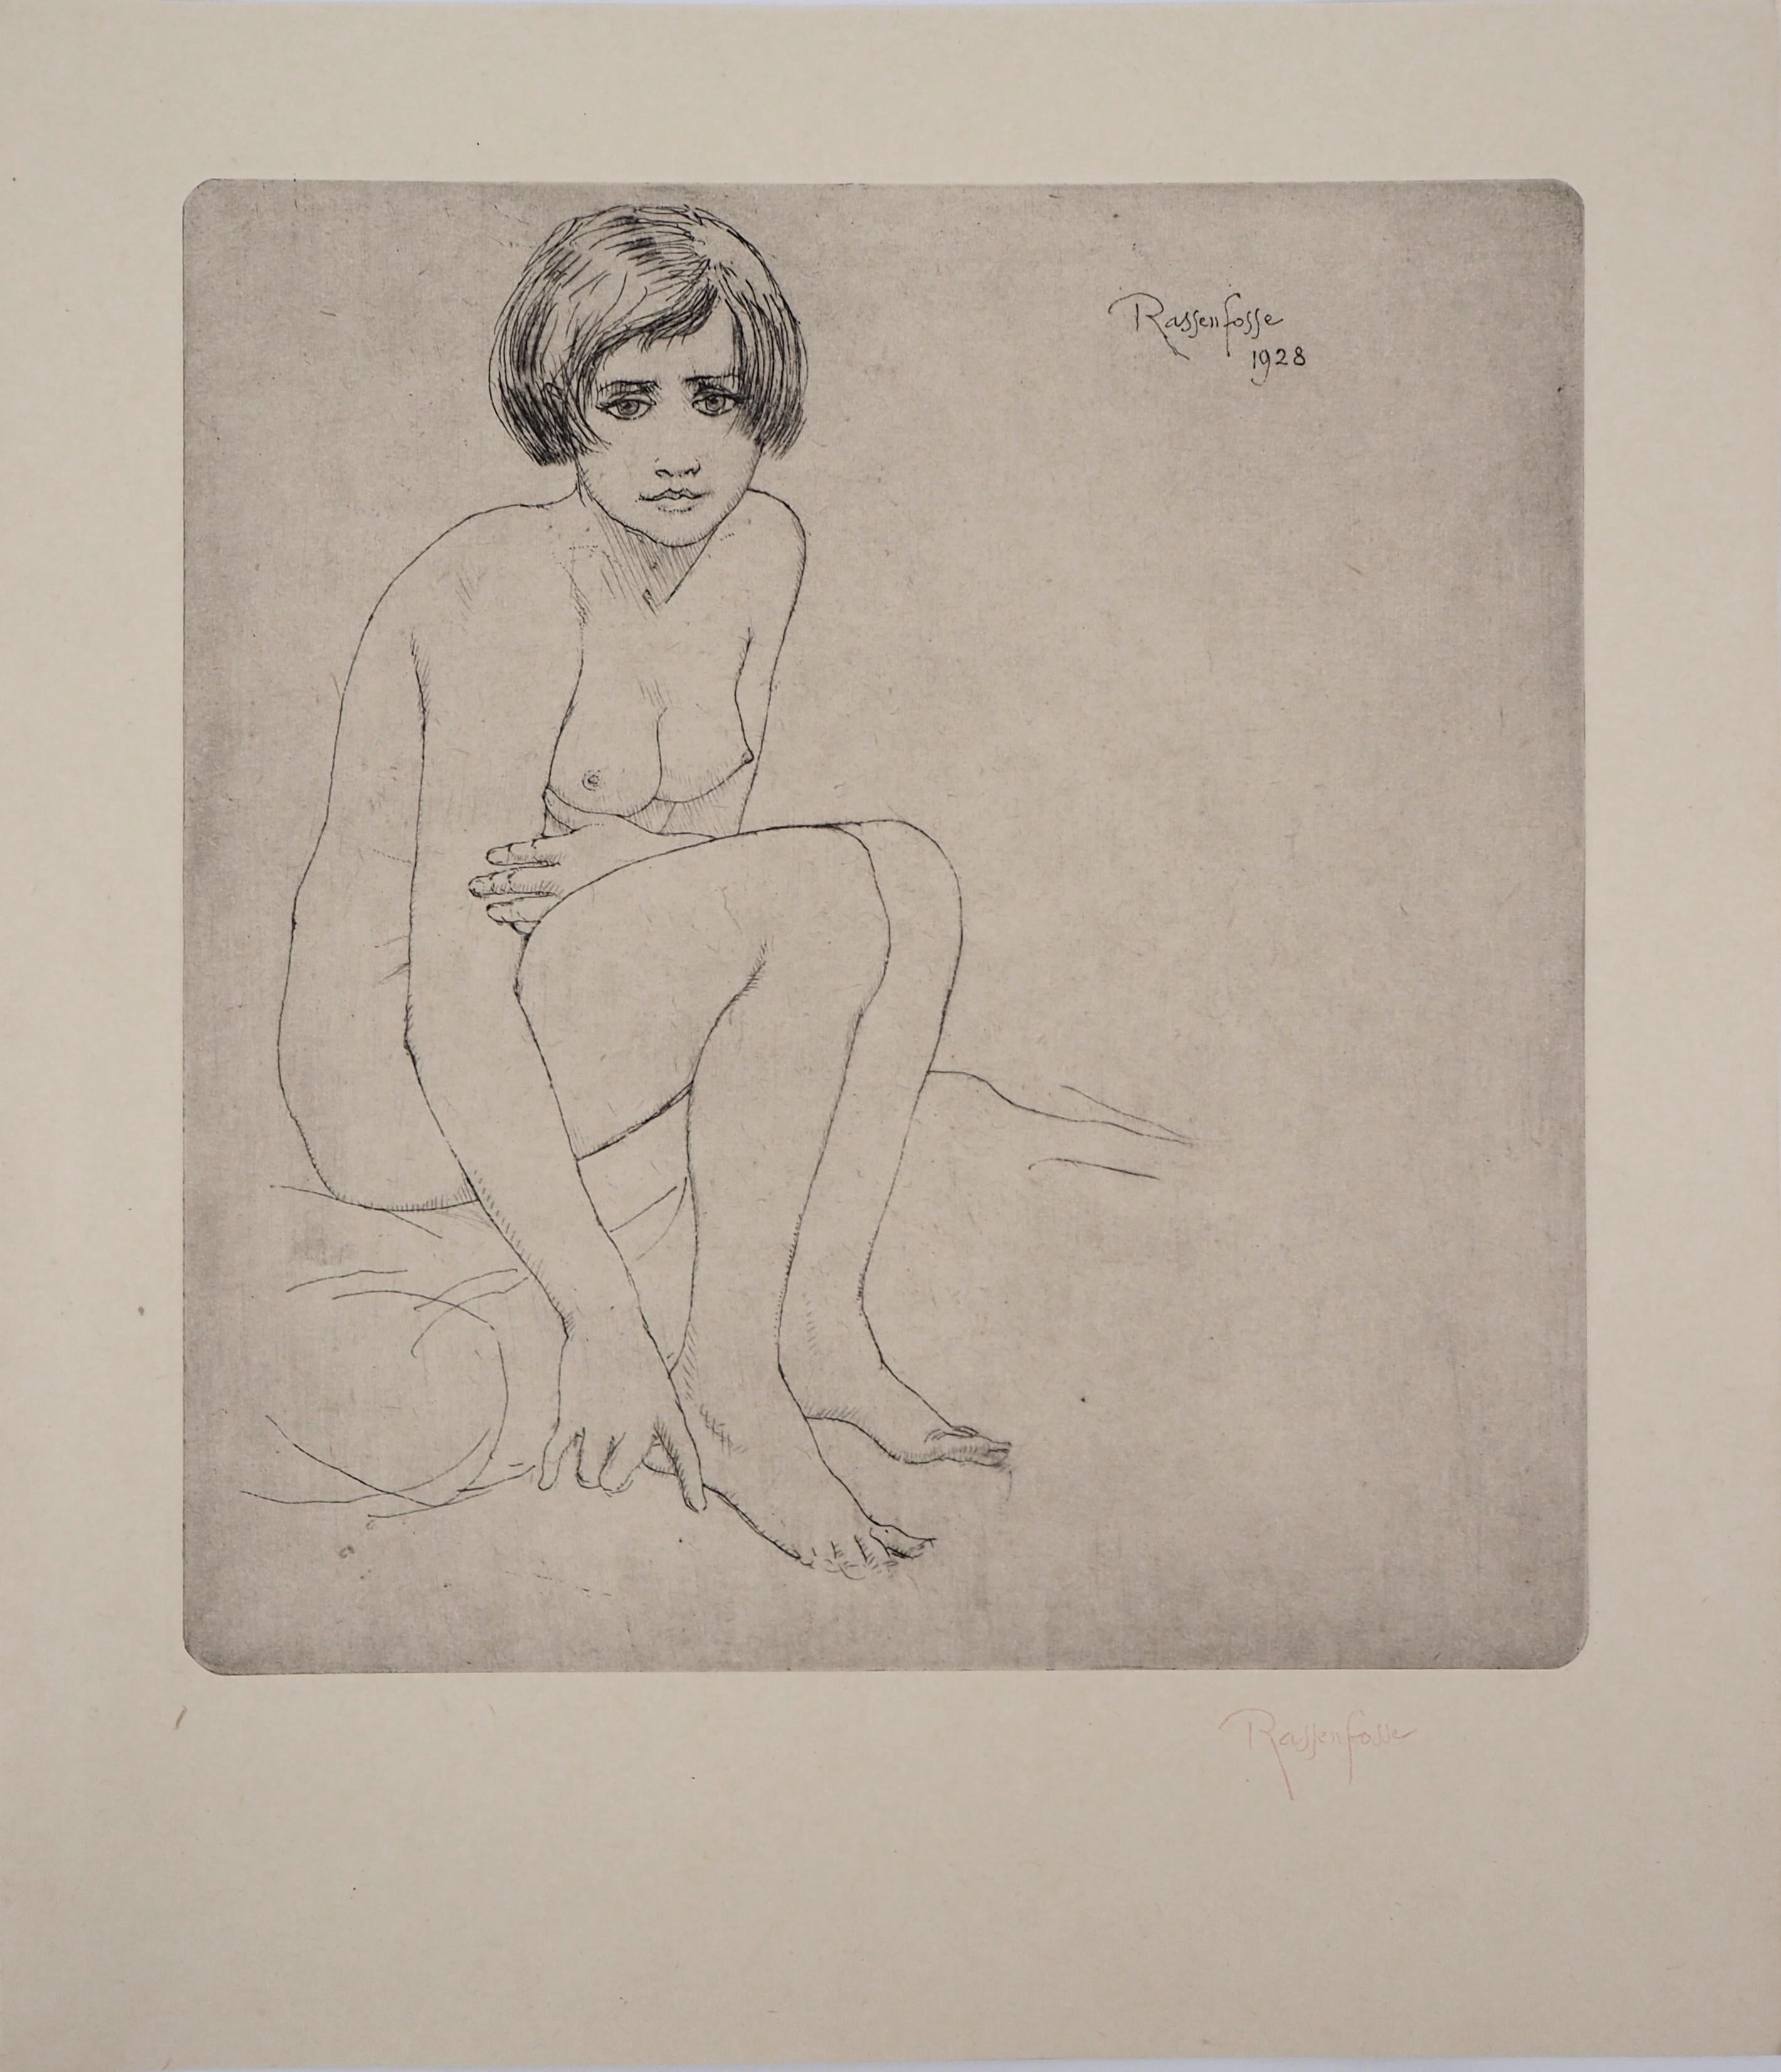 Armand Rassenfosse Figurative Print - Young Model - Original drypoint etching, Handsigned, 1928